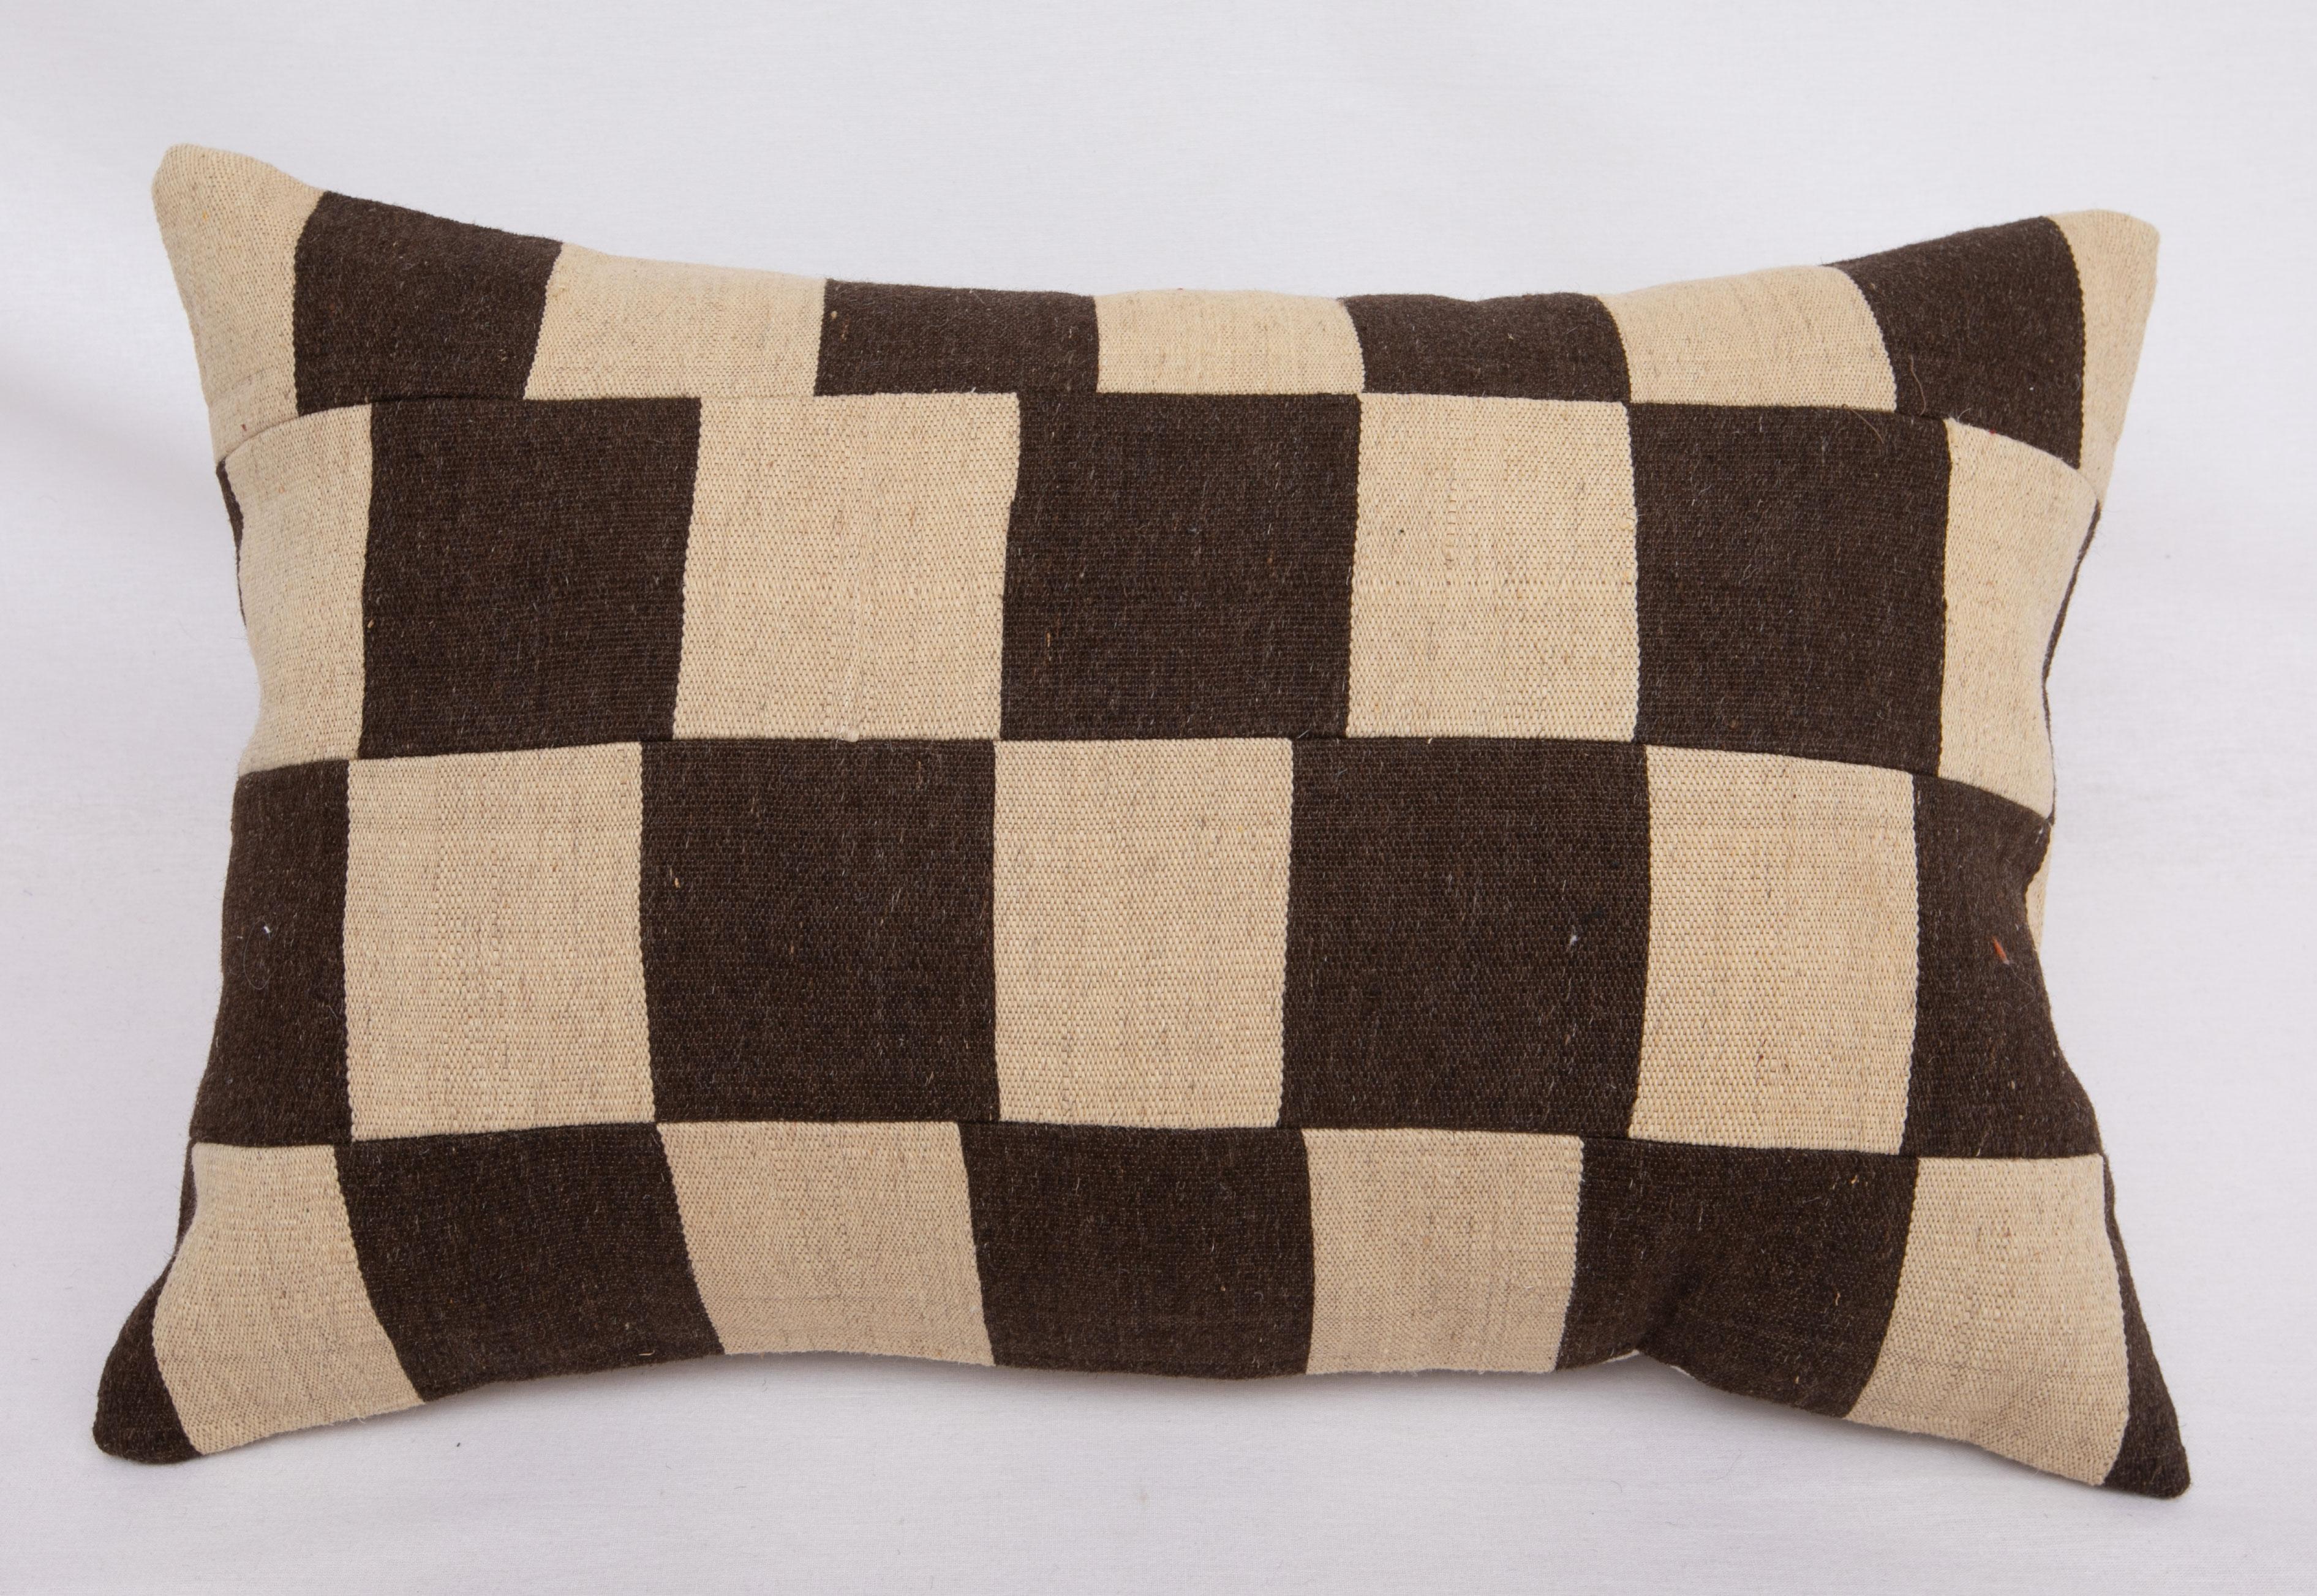 Mid-Century Modern Pillow Cases with Chequers Design Fashioned from a Mid 20th C Flat Weave